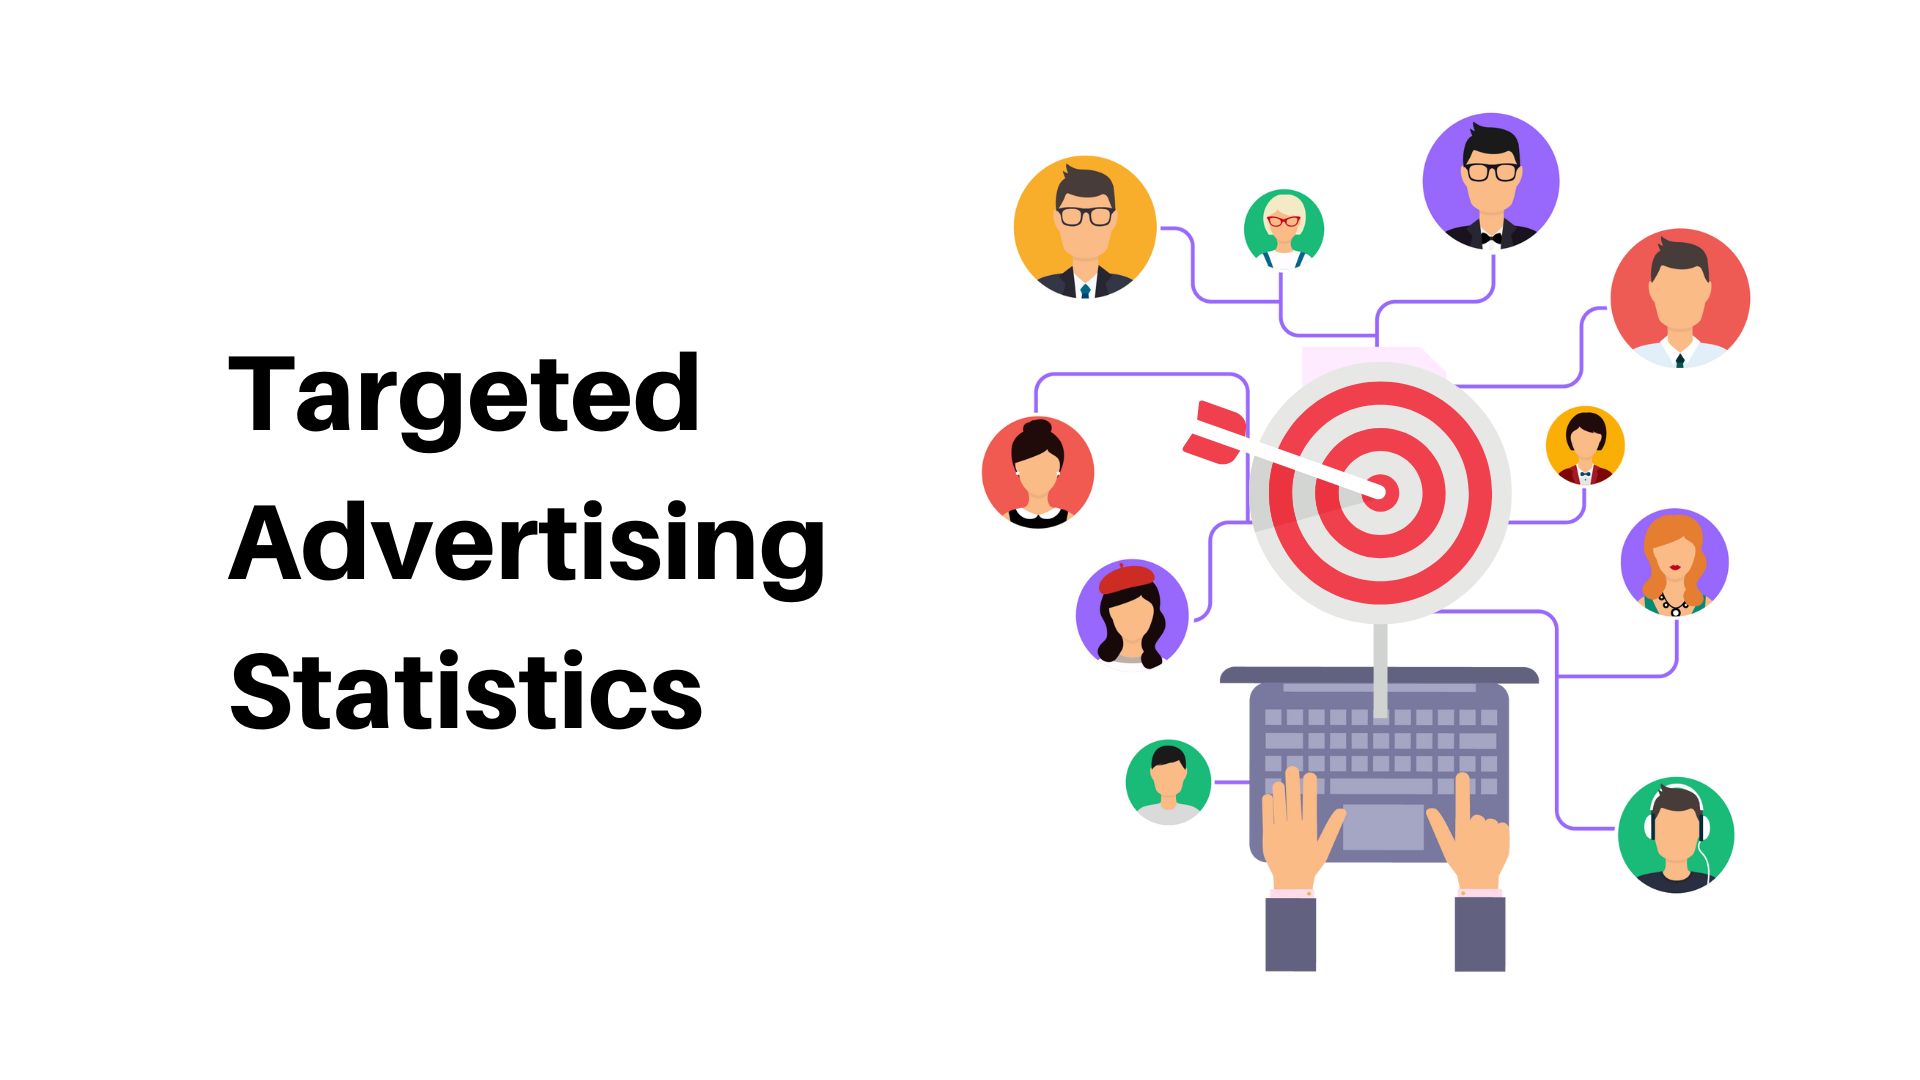 Targeted Advertising Statistics By Countries, Companies and Platforms